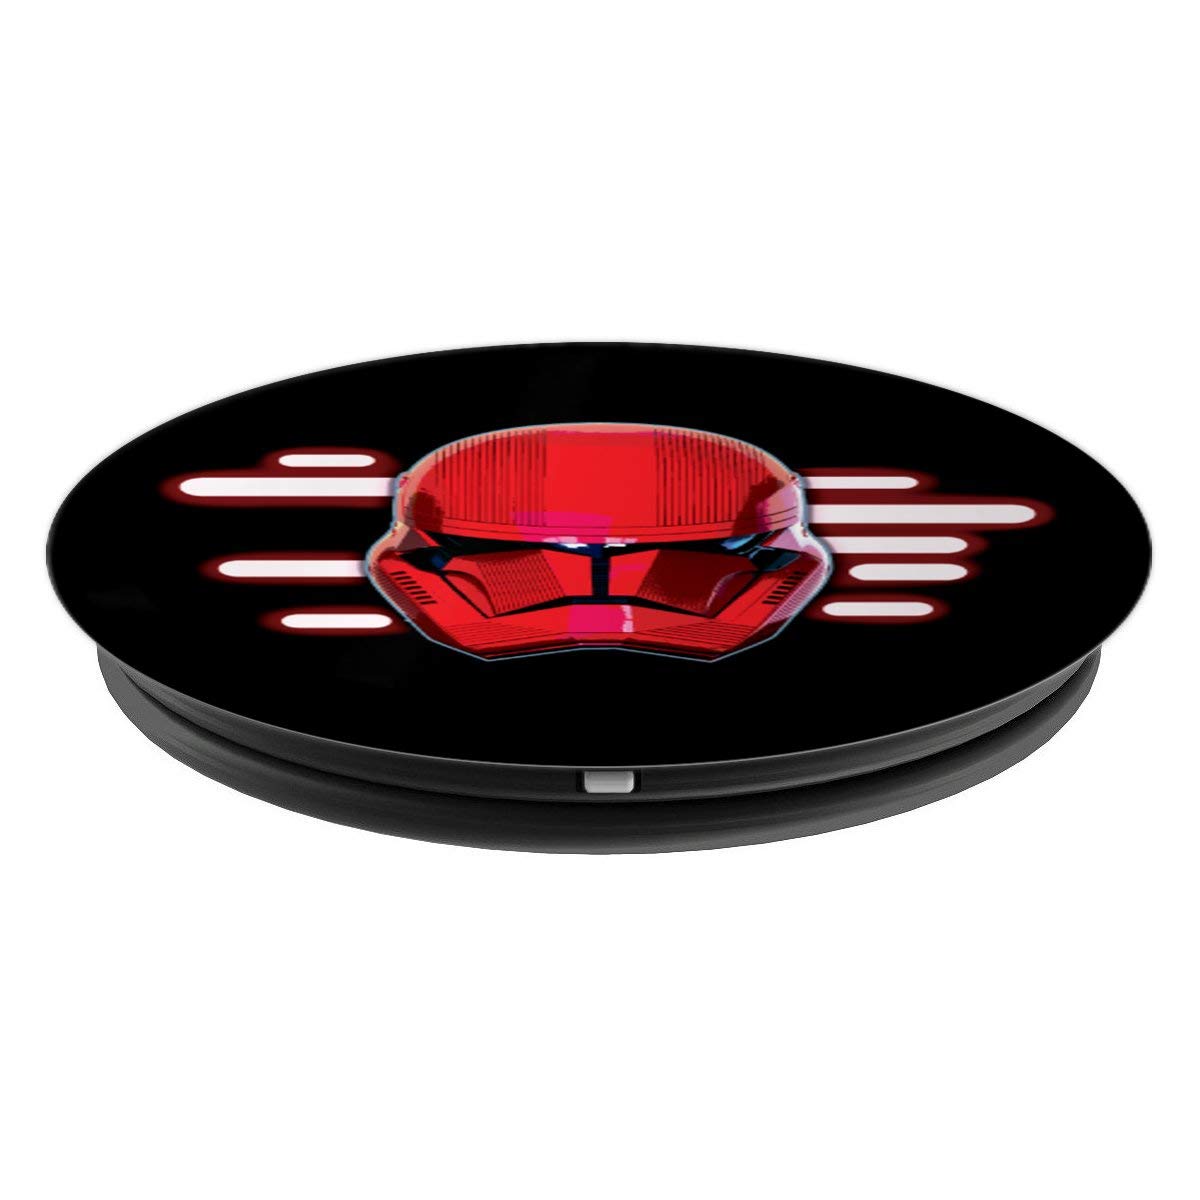 TROS FO Sith Trooper PopSockets Grip and Stand set 2